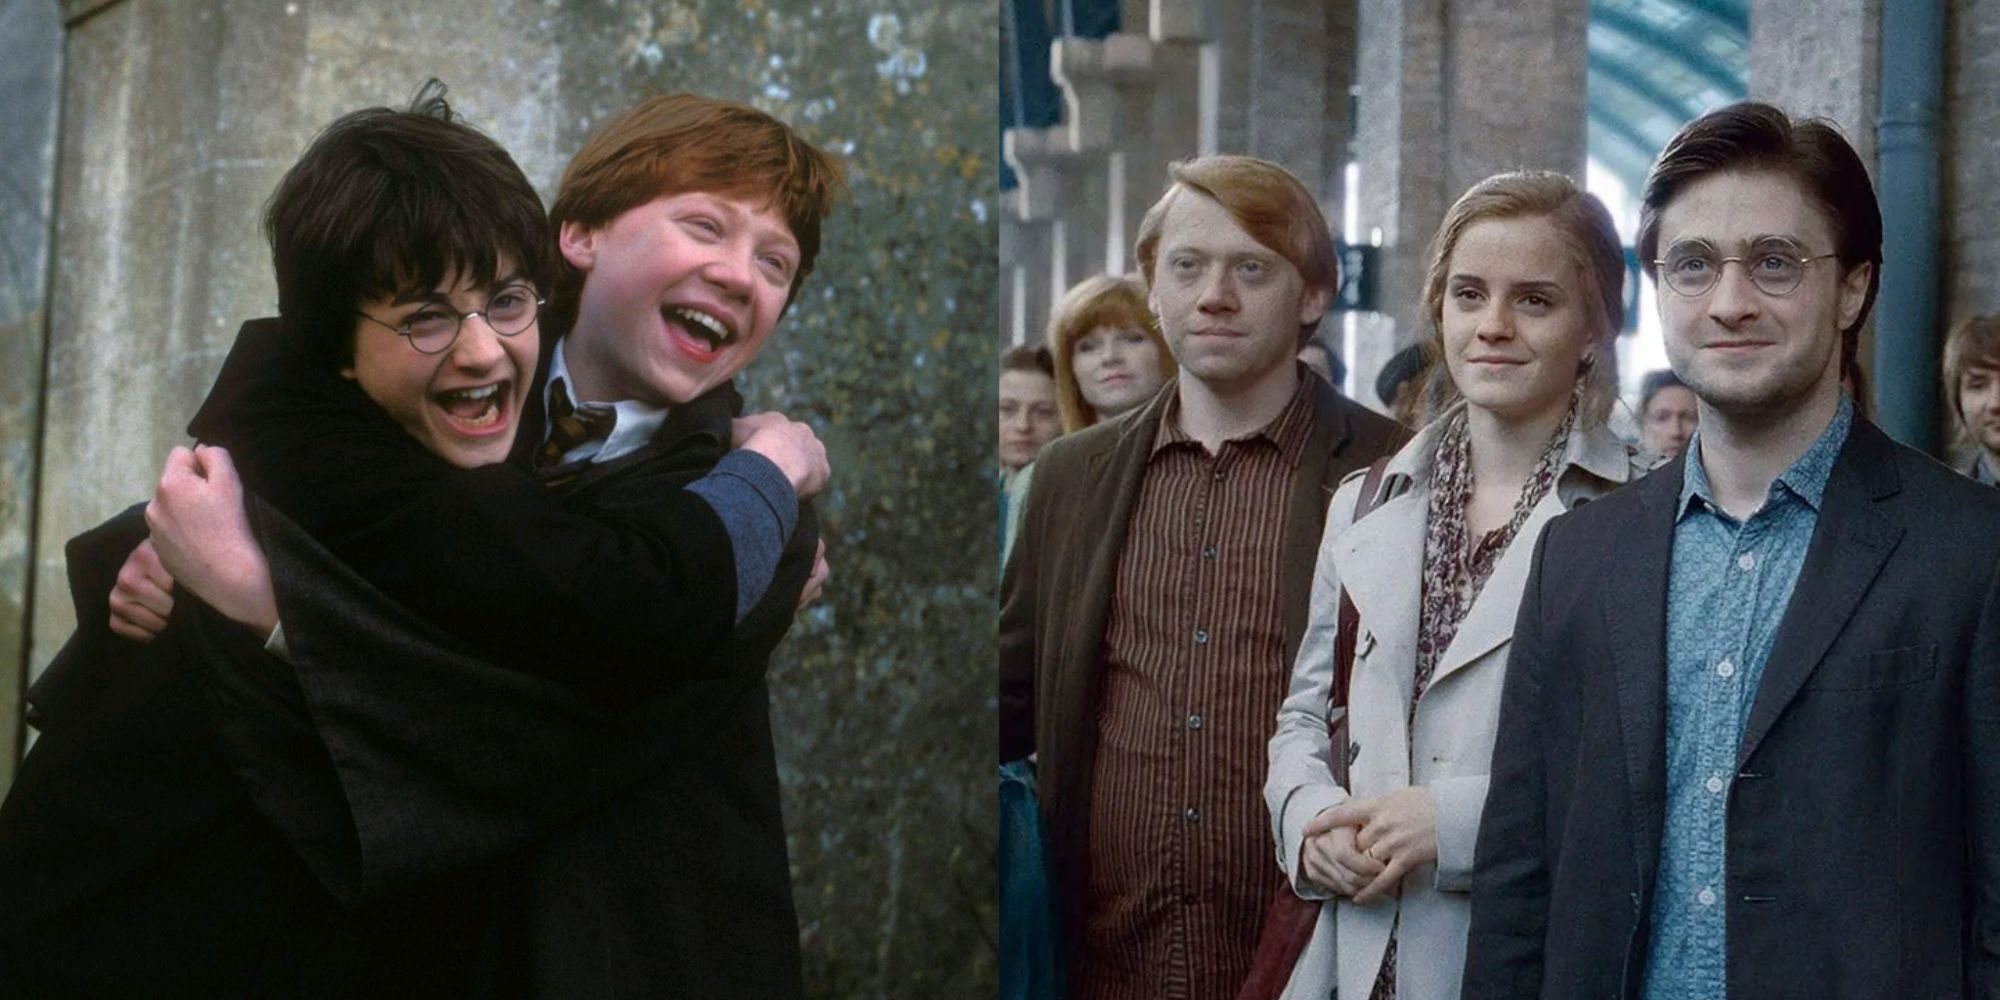 A split image showing Harry and Ron hugging on the left and the older Harry, Ron, and Hermione standing together on the right from Harry Potter. 